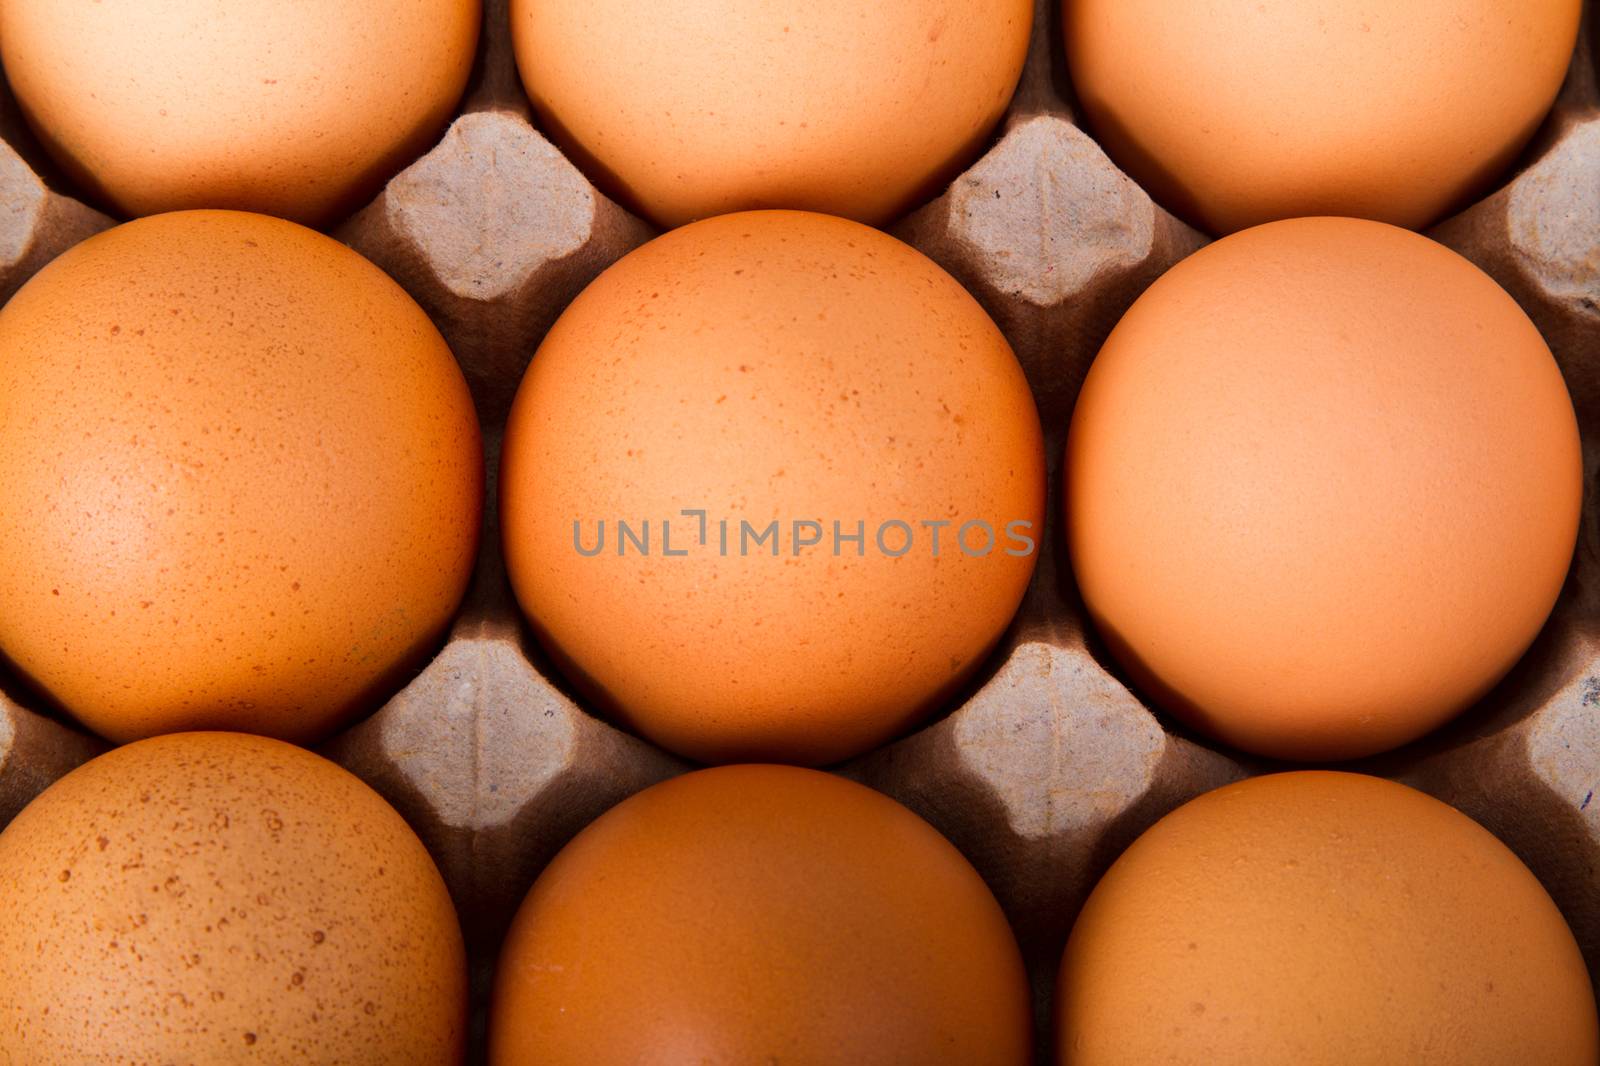 Brown eggs in a carton. Isolated on a white background